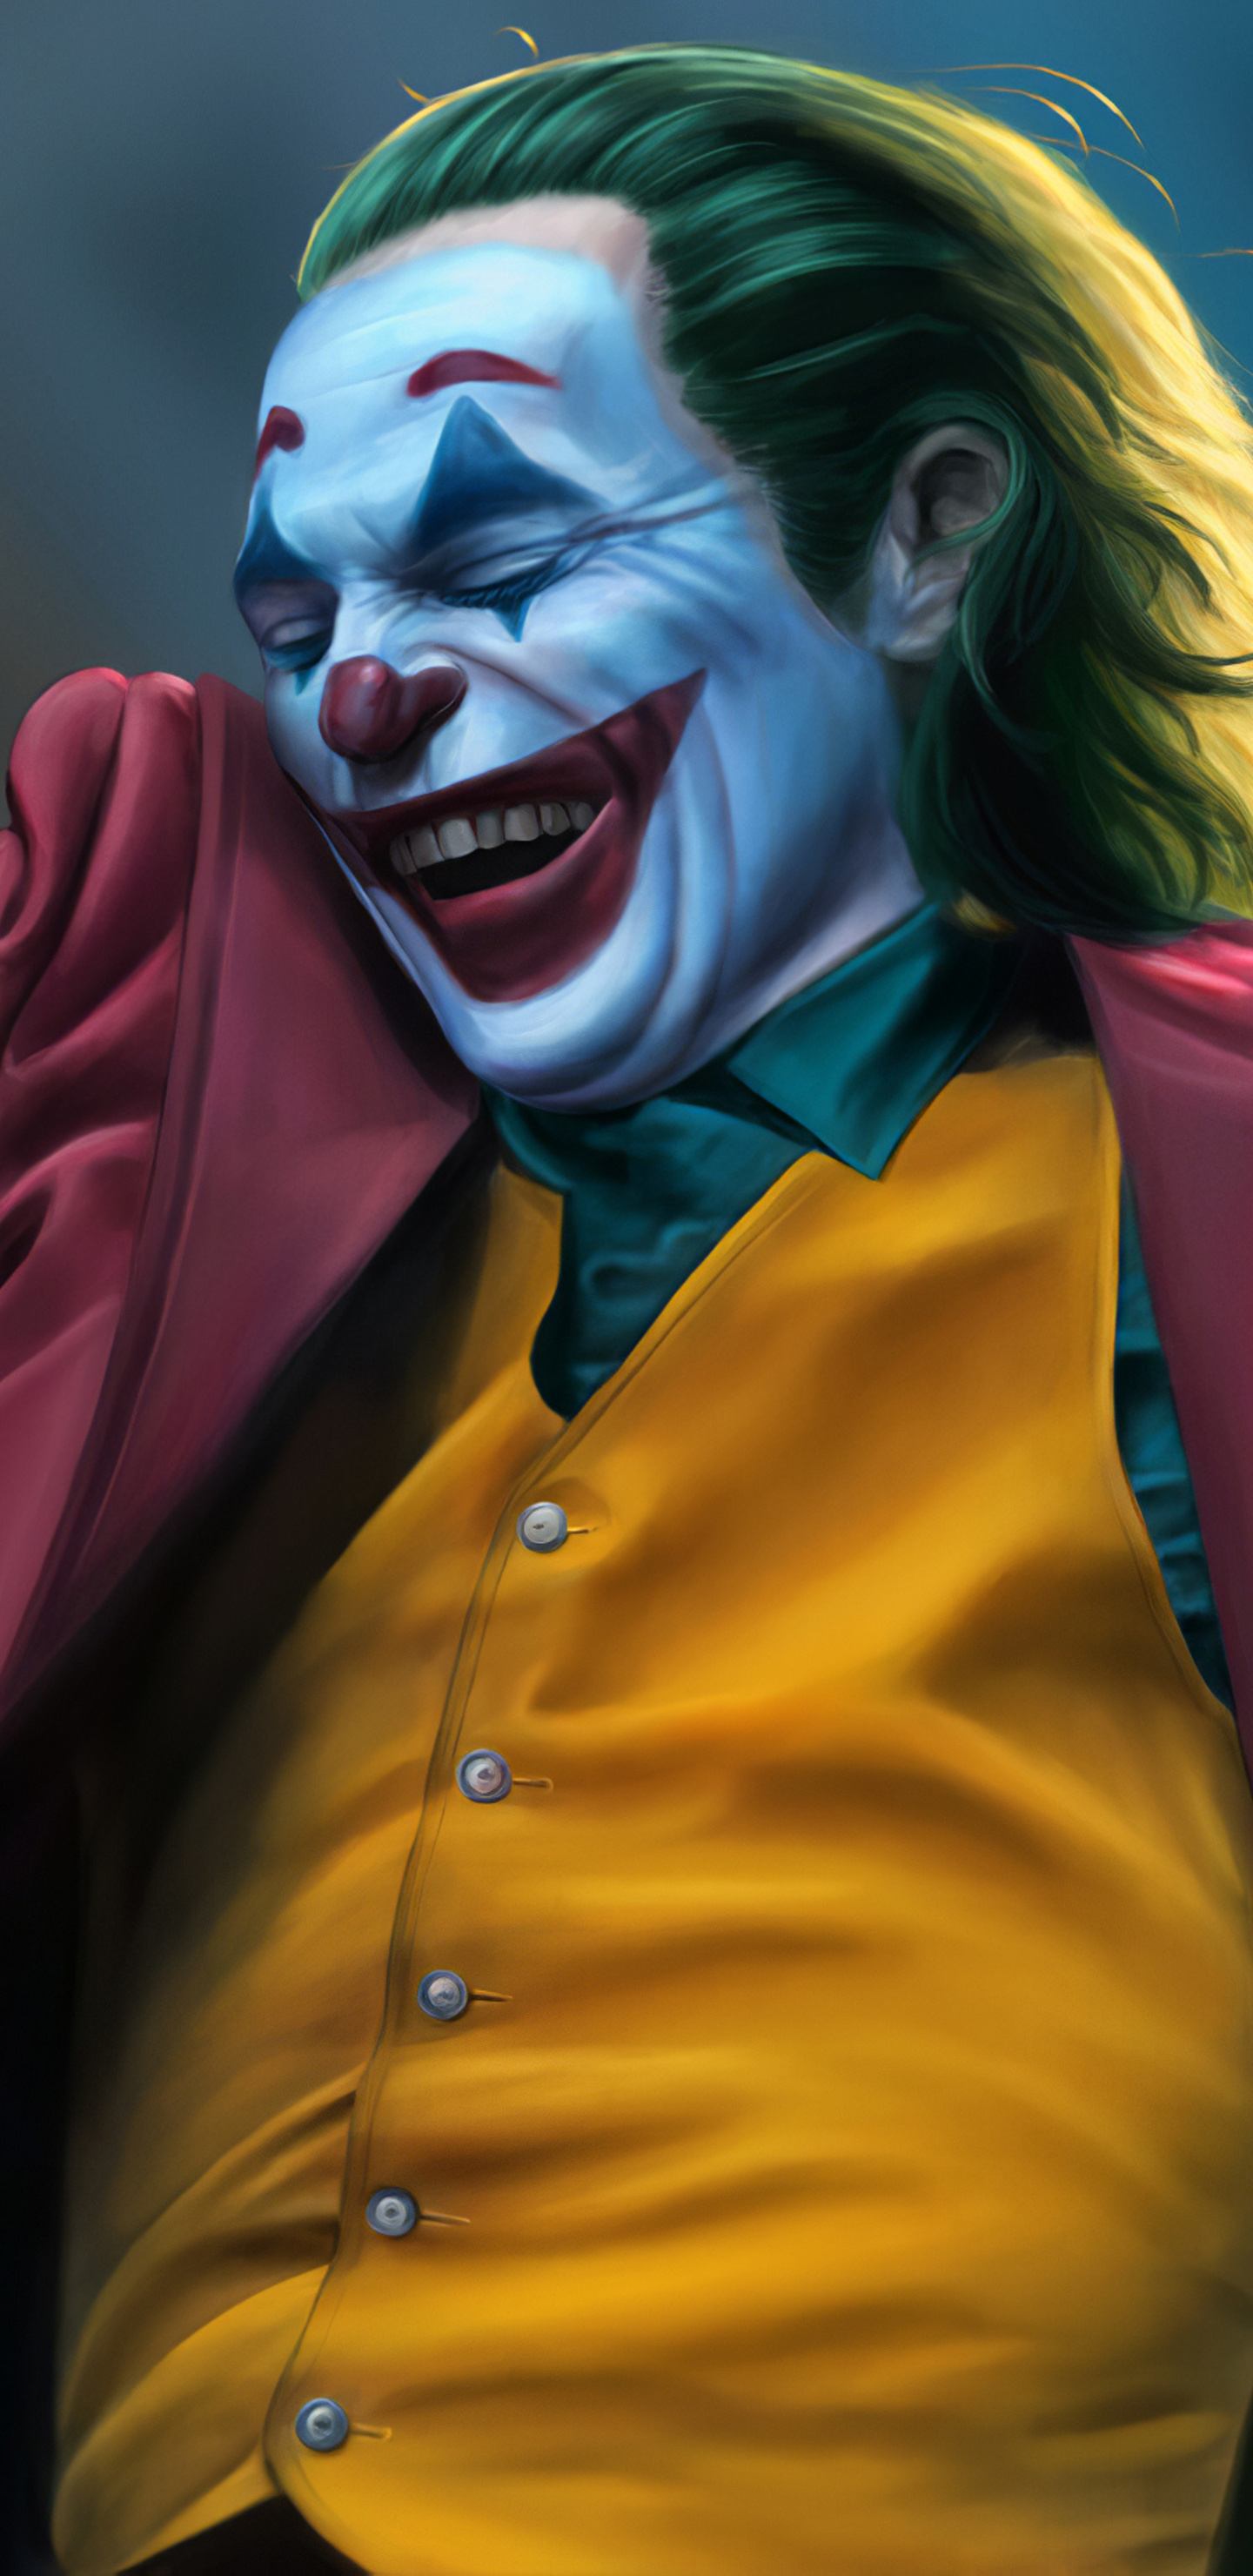 1440x2960 Joker 4k Smile Samsung Galaxy Note 9,8, S9,S8,S8+ QHD HD 4k  Wallpapers, Images, Backgrounds, Photos and Pictures